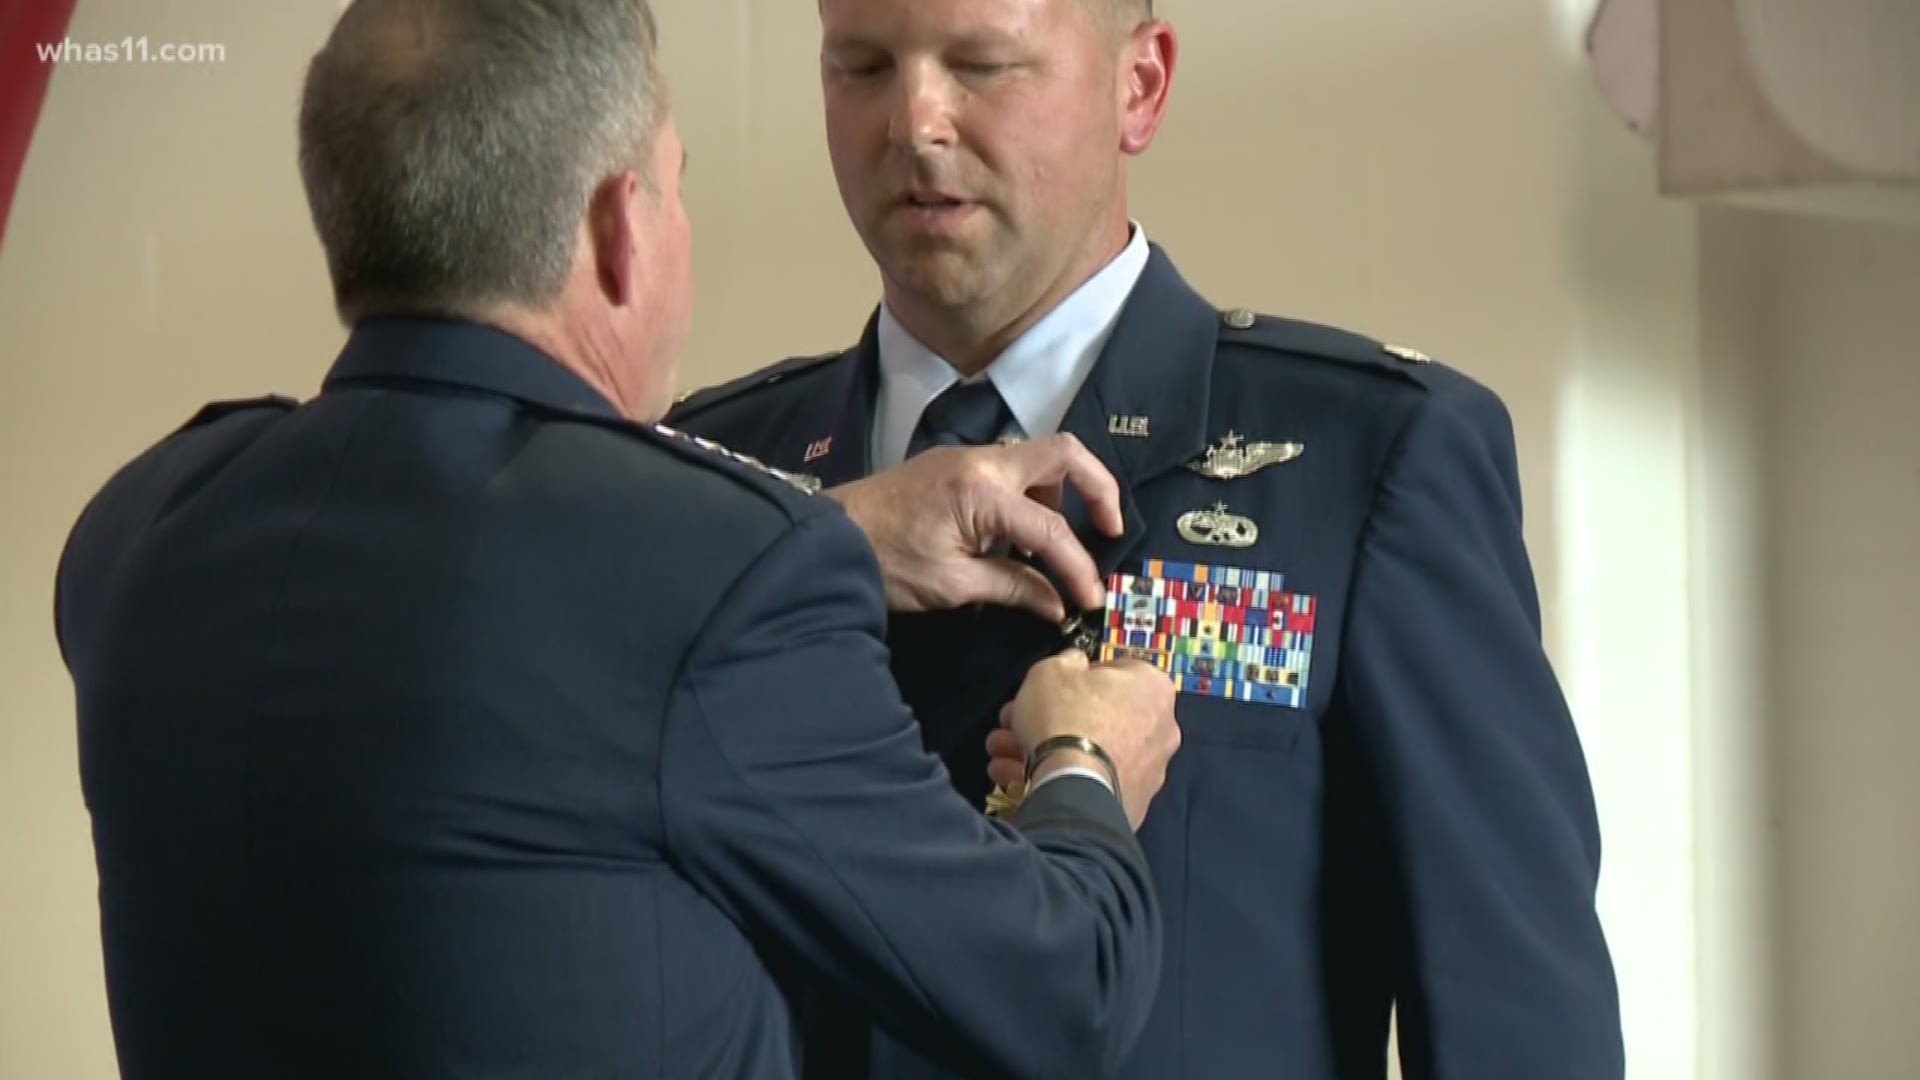 A Kentucky Air National Guard pilot was awarded with the Distinguished Flying Cross for extraordinary achievement.